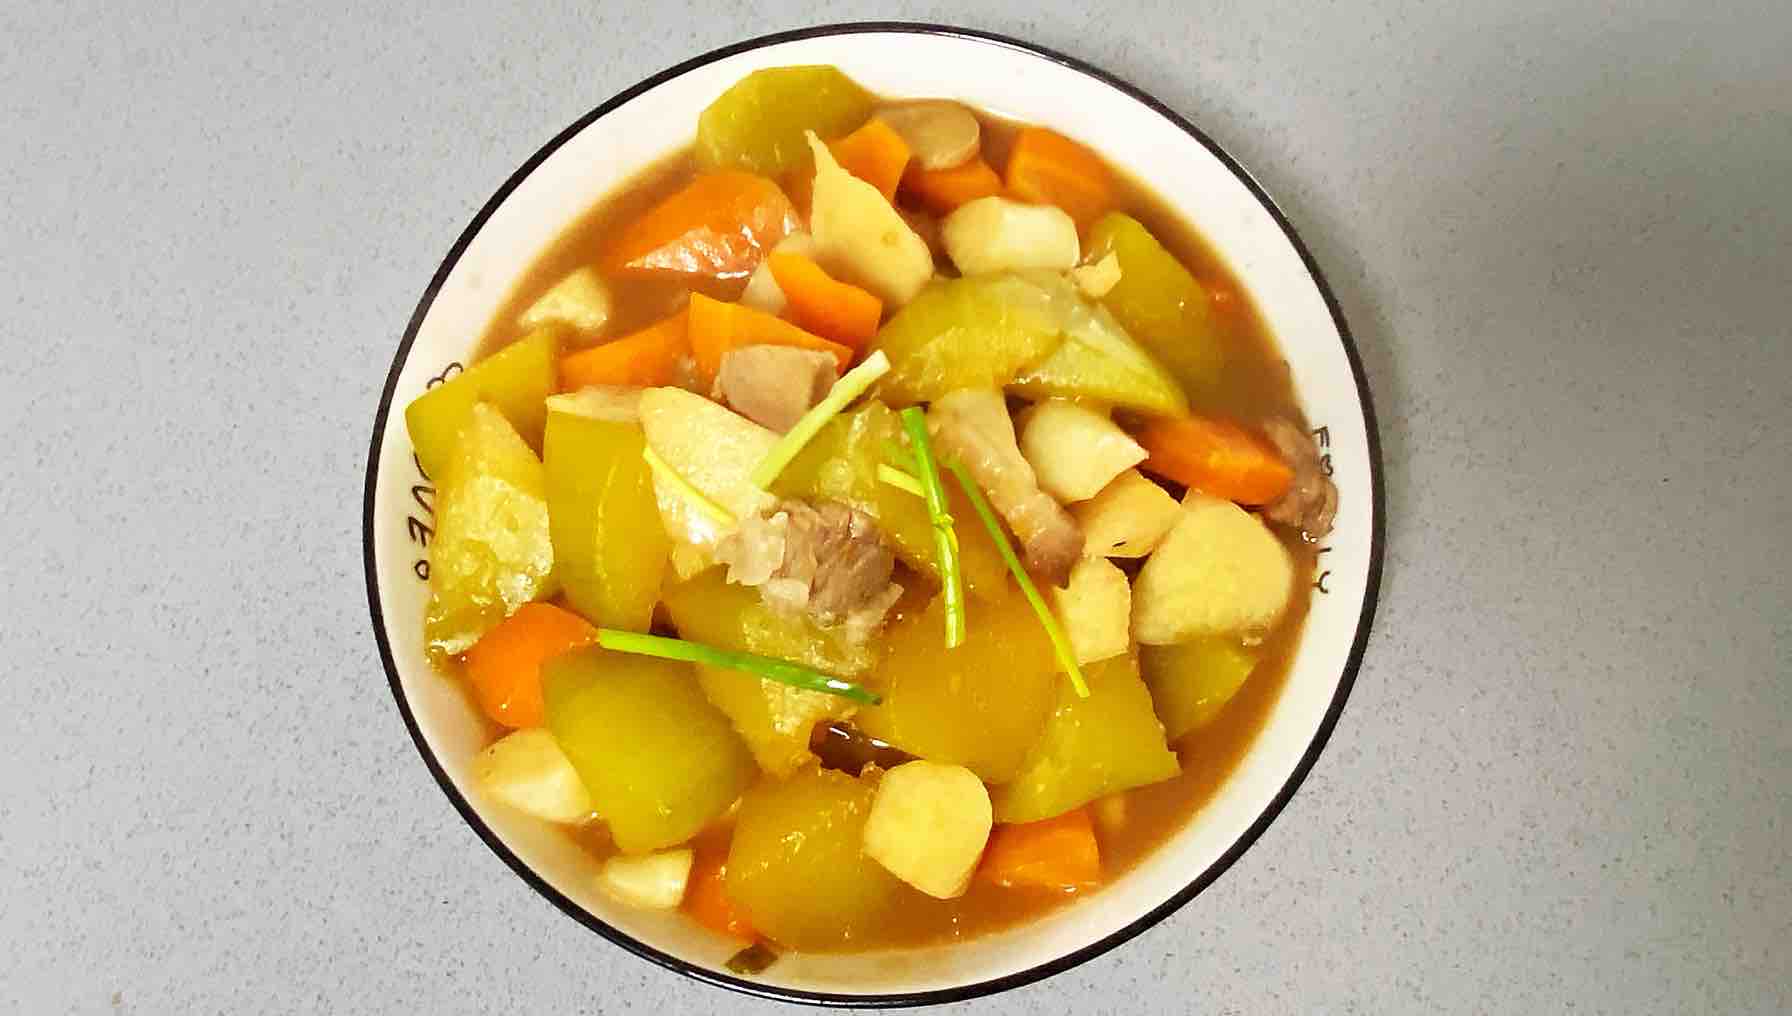 [recipe for Pregnant Women] Braised Pumpkin in Abalone Sauce with Rice and White Rice, Full of Umami, recipe